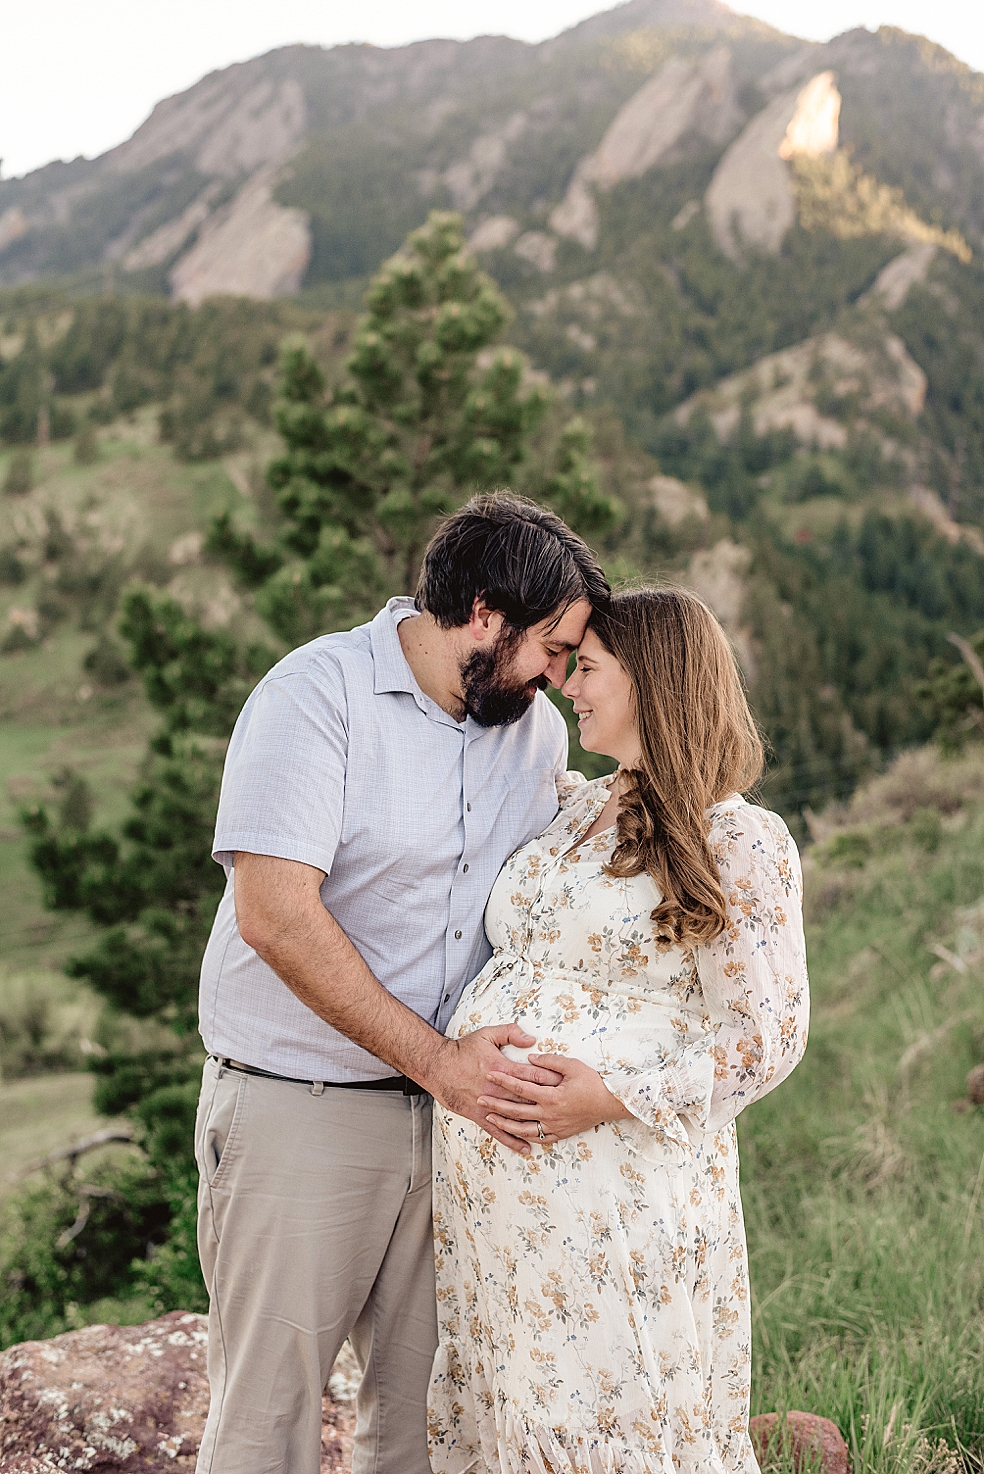 Mom and dad to be with their foreheads together | Photo by Meridianville Maternity Photographer Jessica Lee